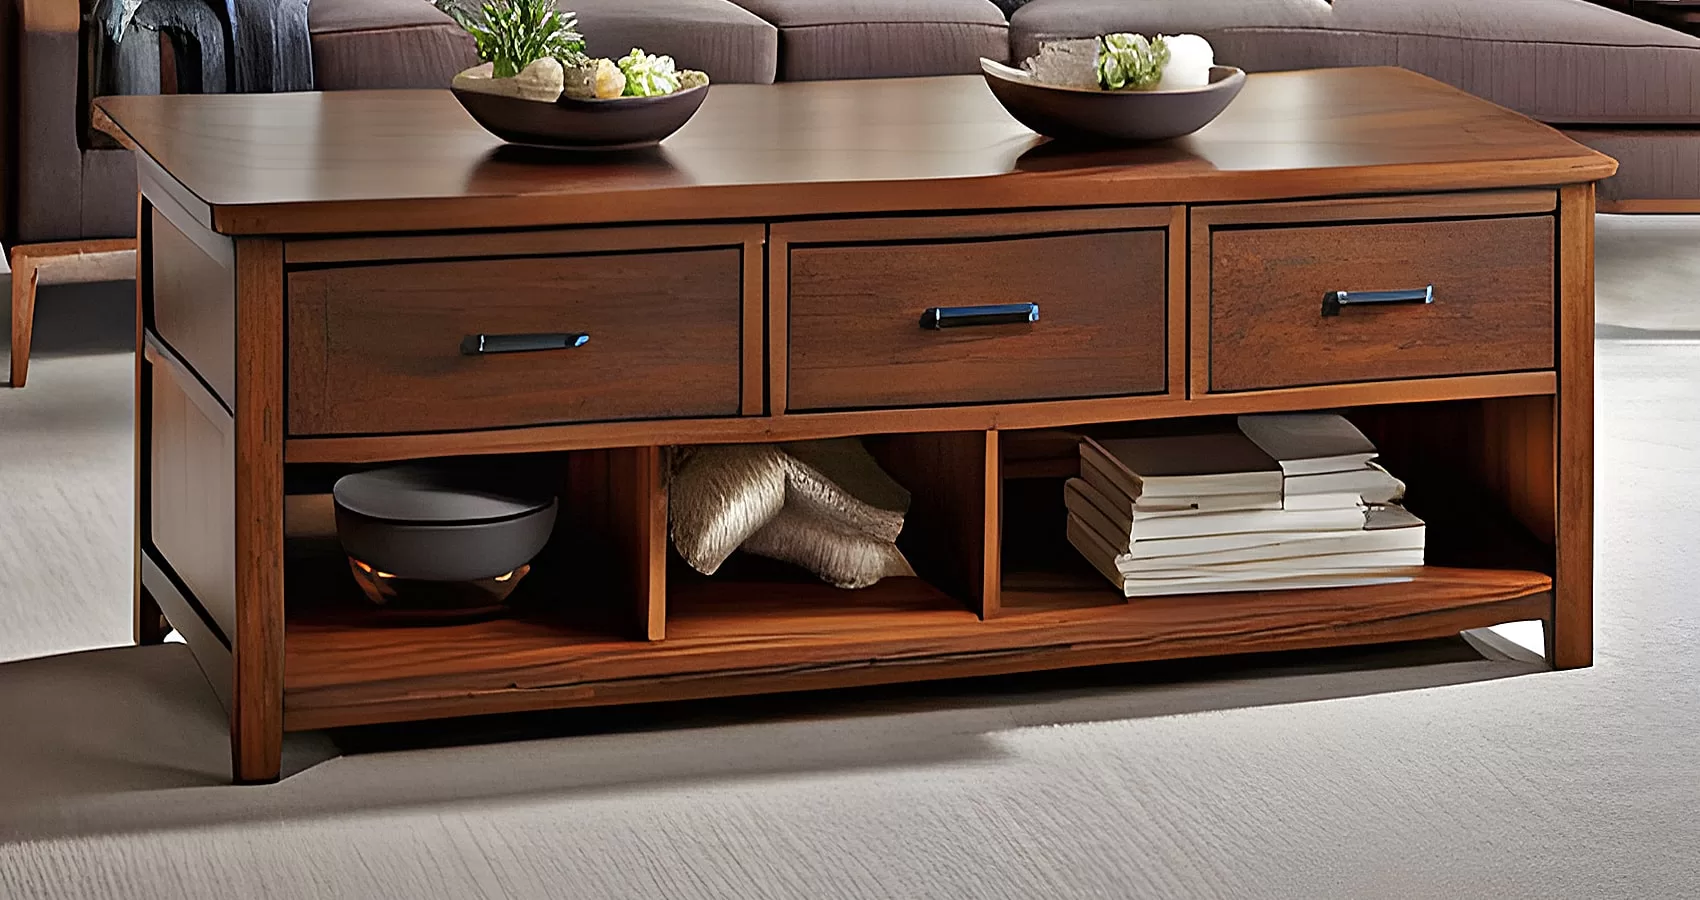 SOFA TABLE WITH DRAWERS Min Jpg.webp